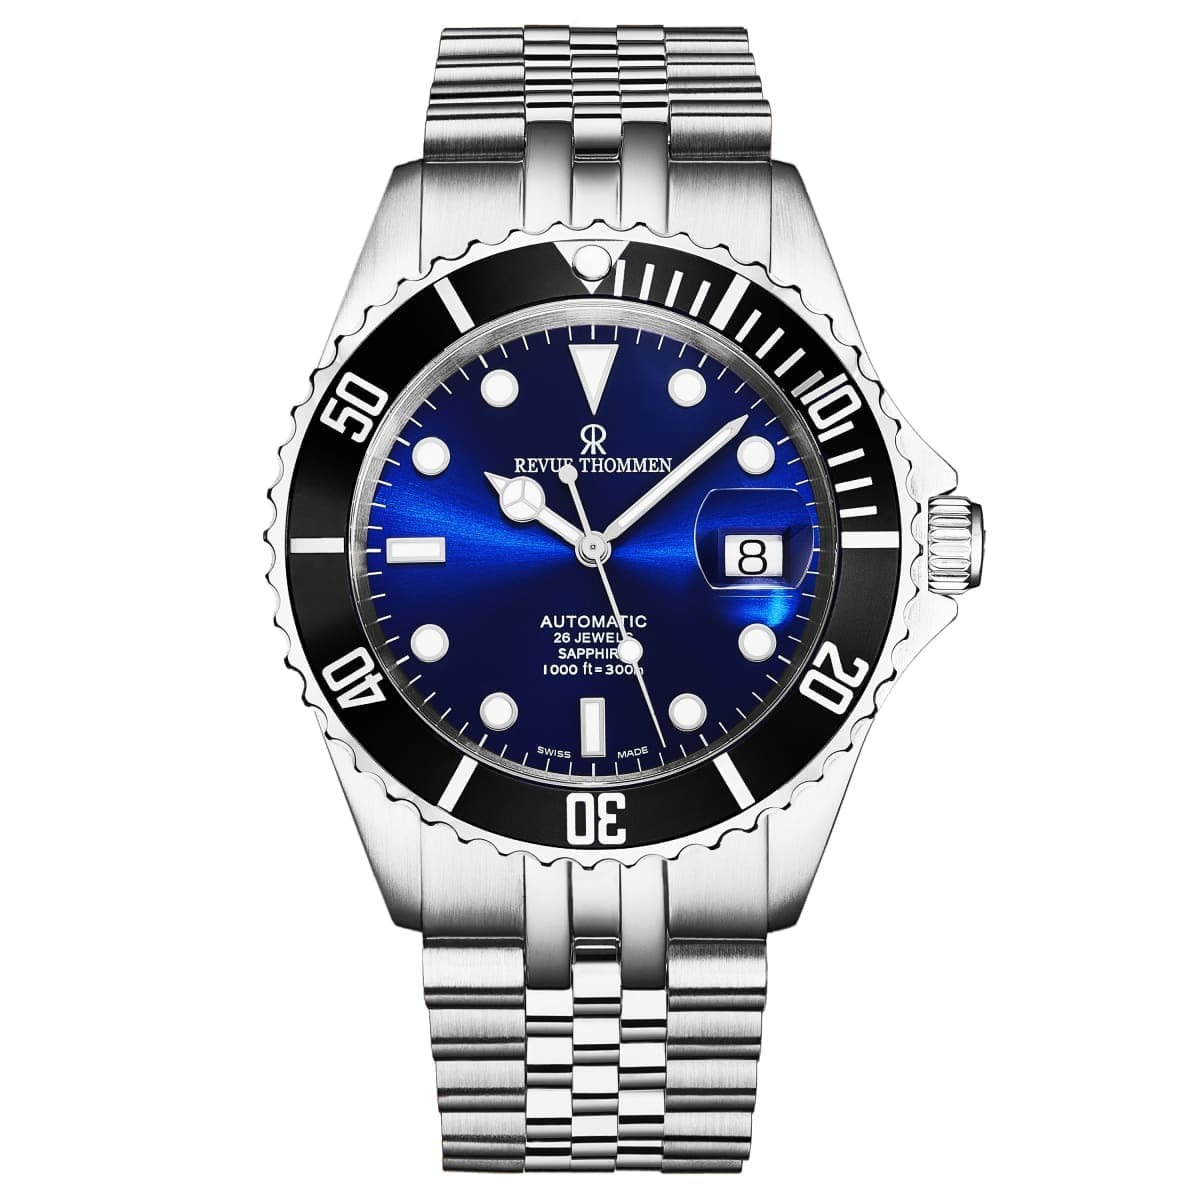 A Revue Thommen Men's 'Diver' Blue Dial Stainless Steel Bracelet Automatic Watch 17571.2223 with blue dial.